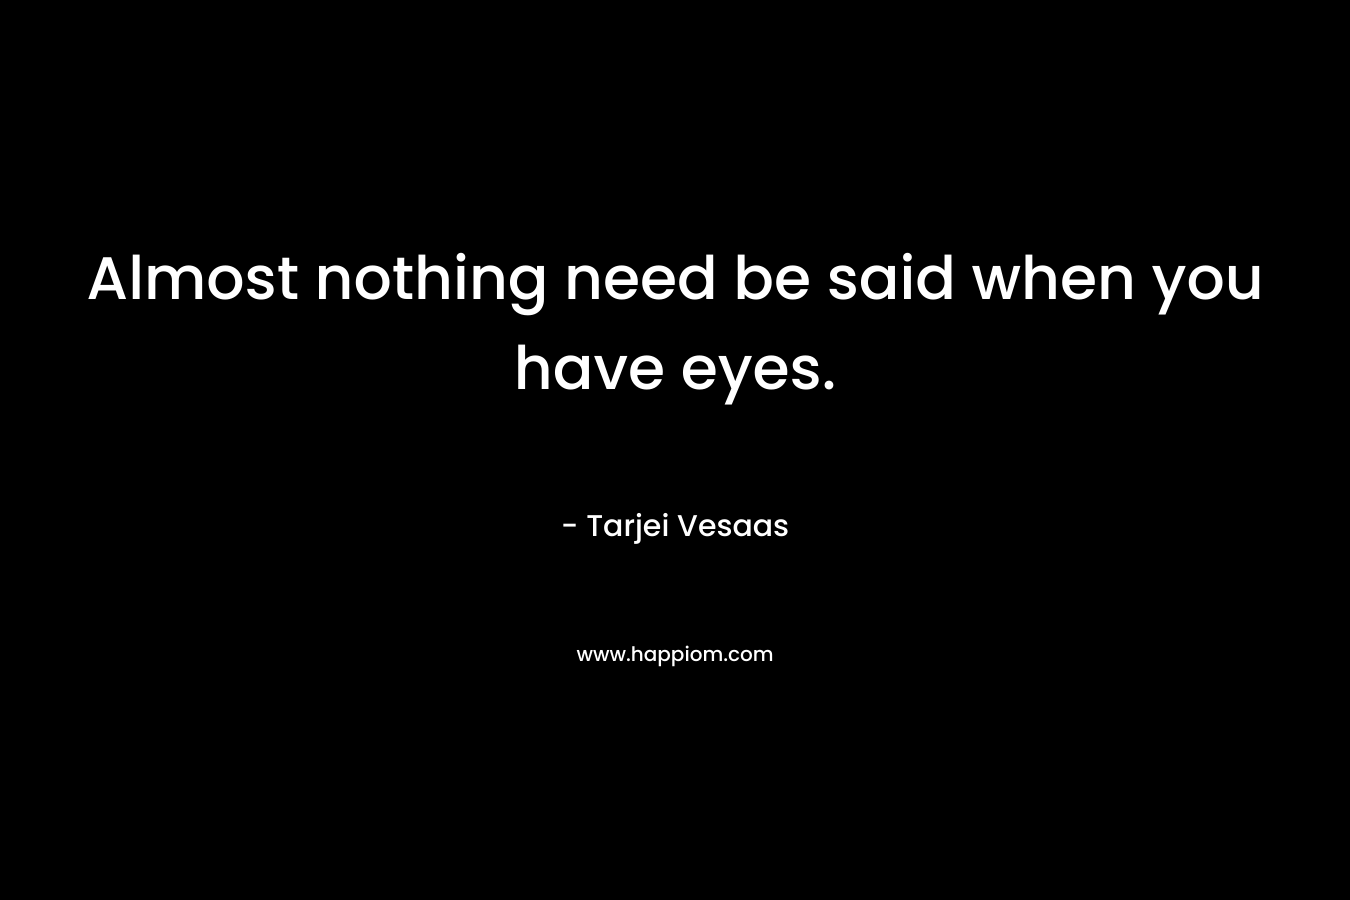 Almost nothing need be said when you have eyes. – Tarjei Vesaas